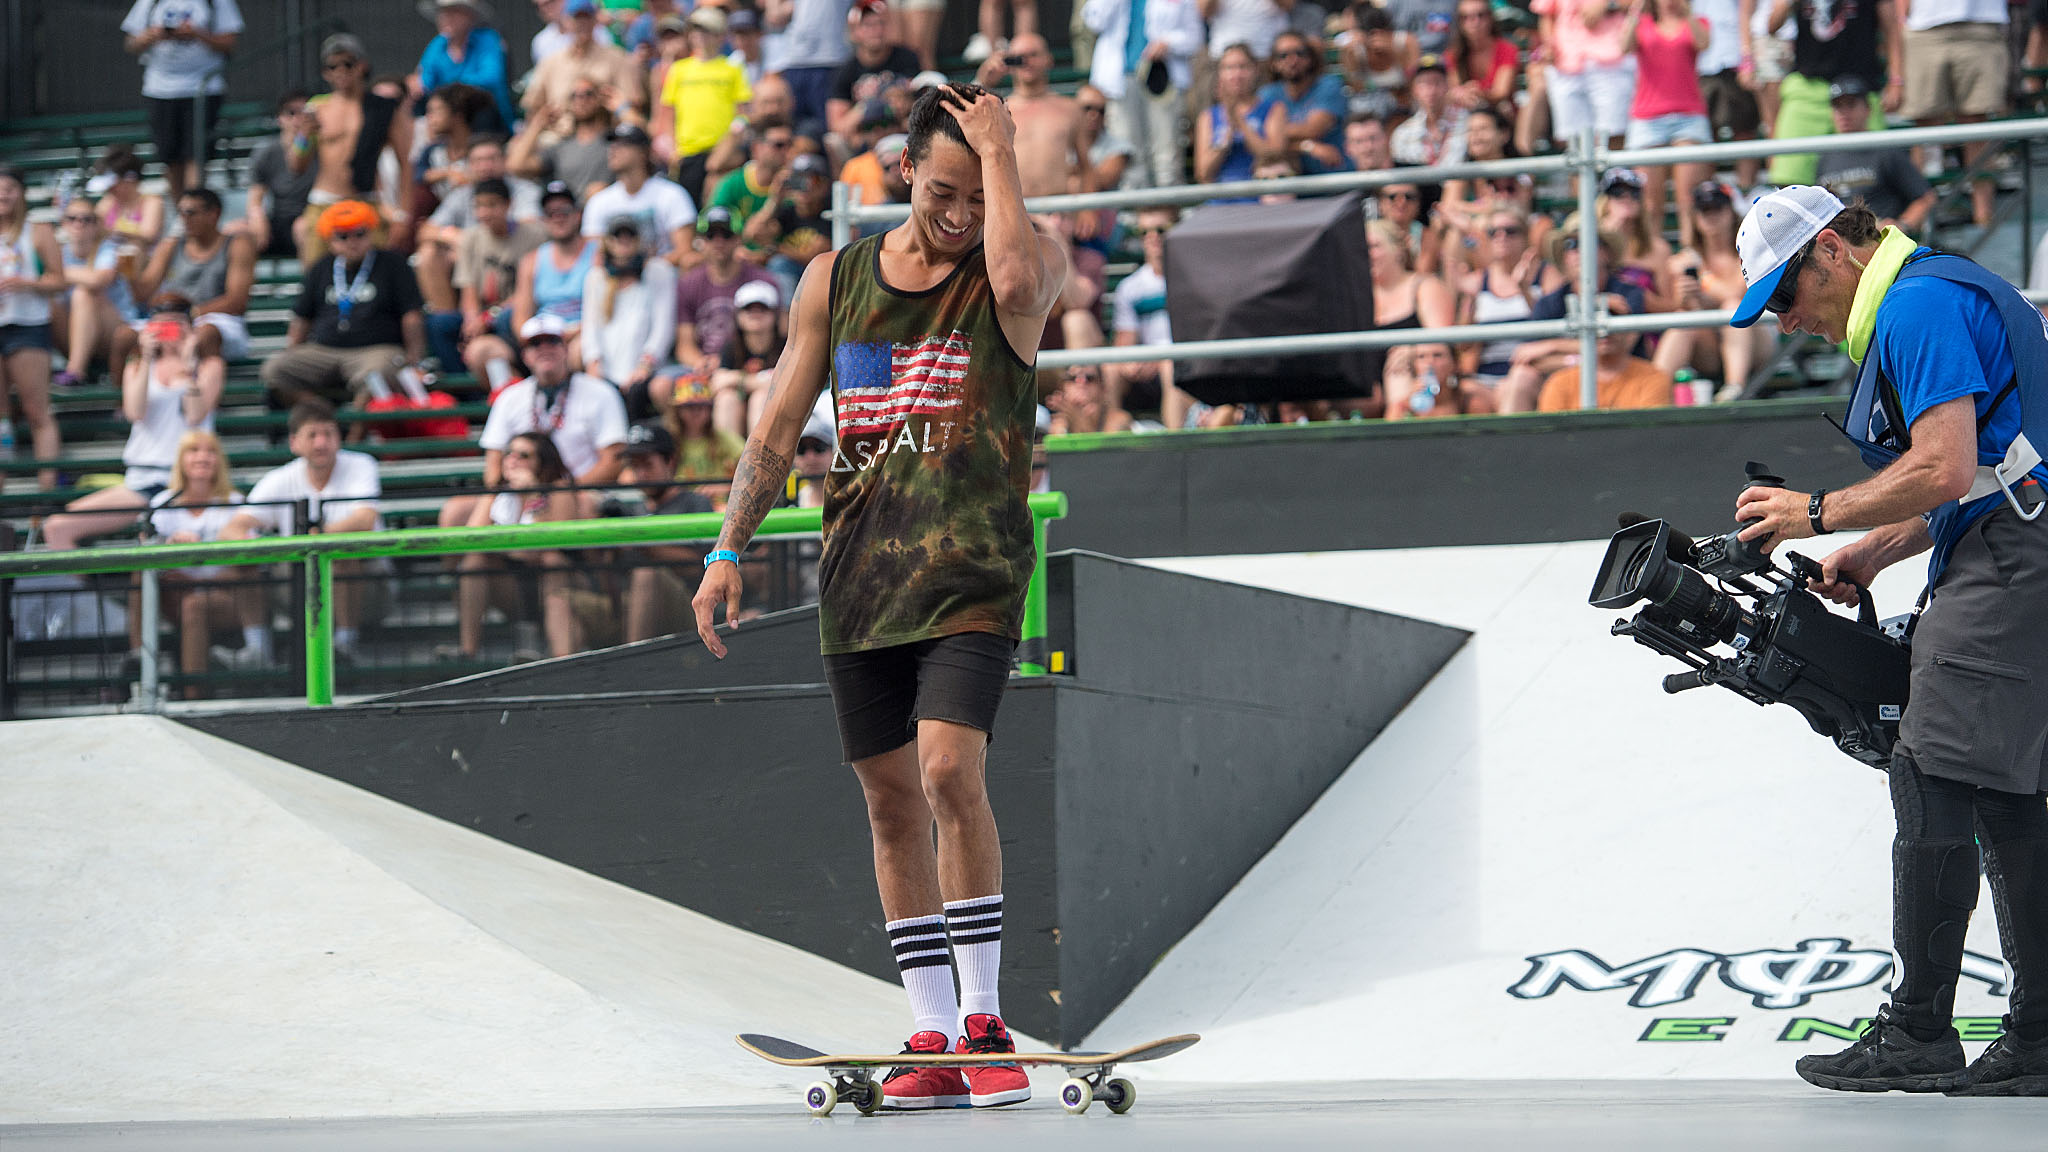 The only person who could beat Nyjah's Huston's first-run score was Huston himself. His second-run score was the highest ever recorded in Men's Skateboard Street. His third-run victory lap ended early, but not before he threw in a nollie backside overcook on the midcourse rail for good measure. brbrThis is Huston's fifth Skateboard Street gold medal. He holds three more medals, two silver and one bronze, as well as a gold from Real Street 2012.